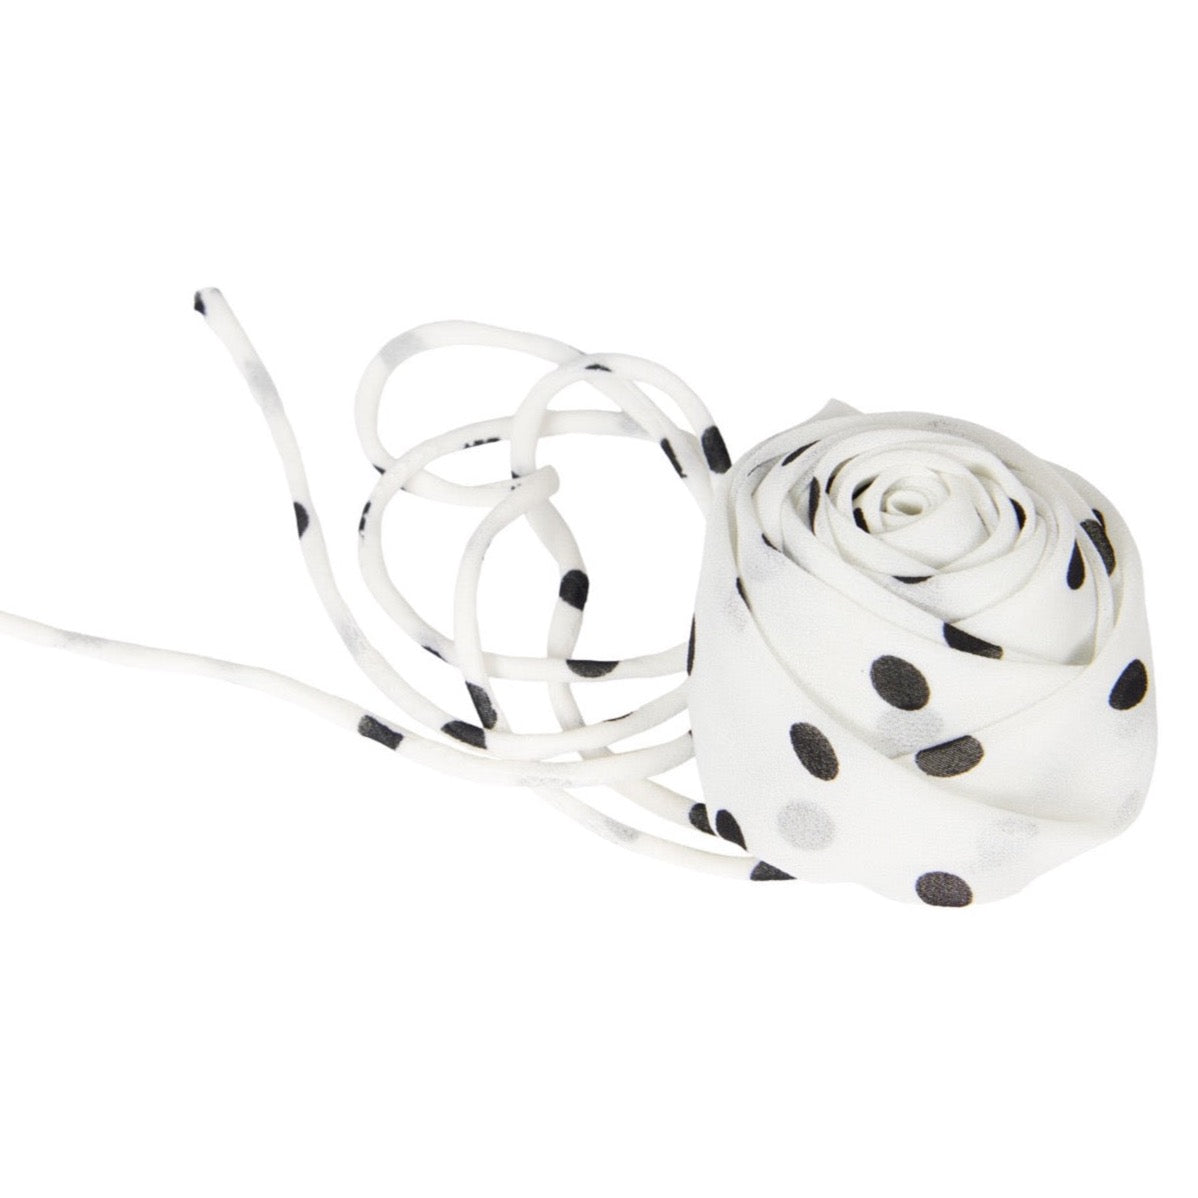 Dotted Rose String